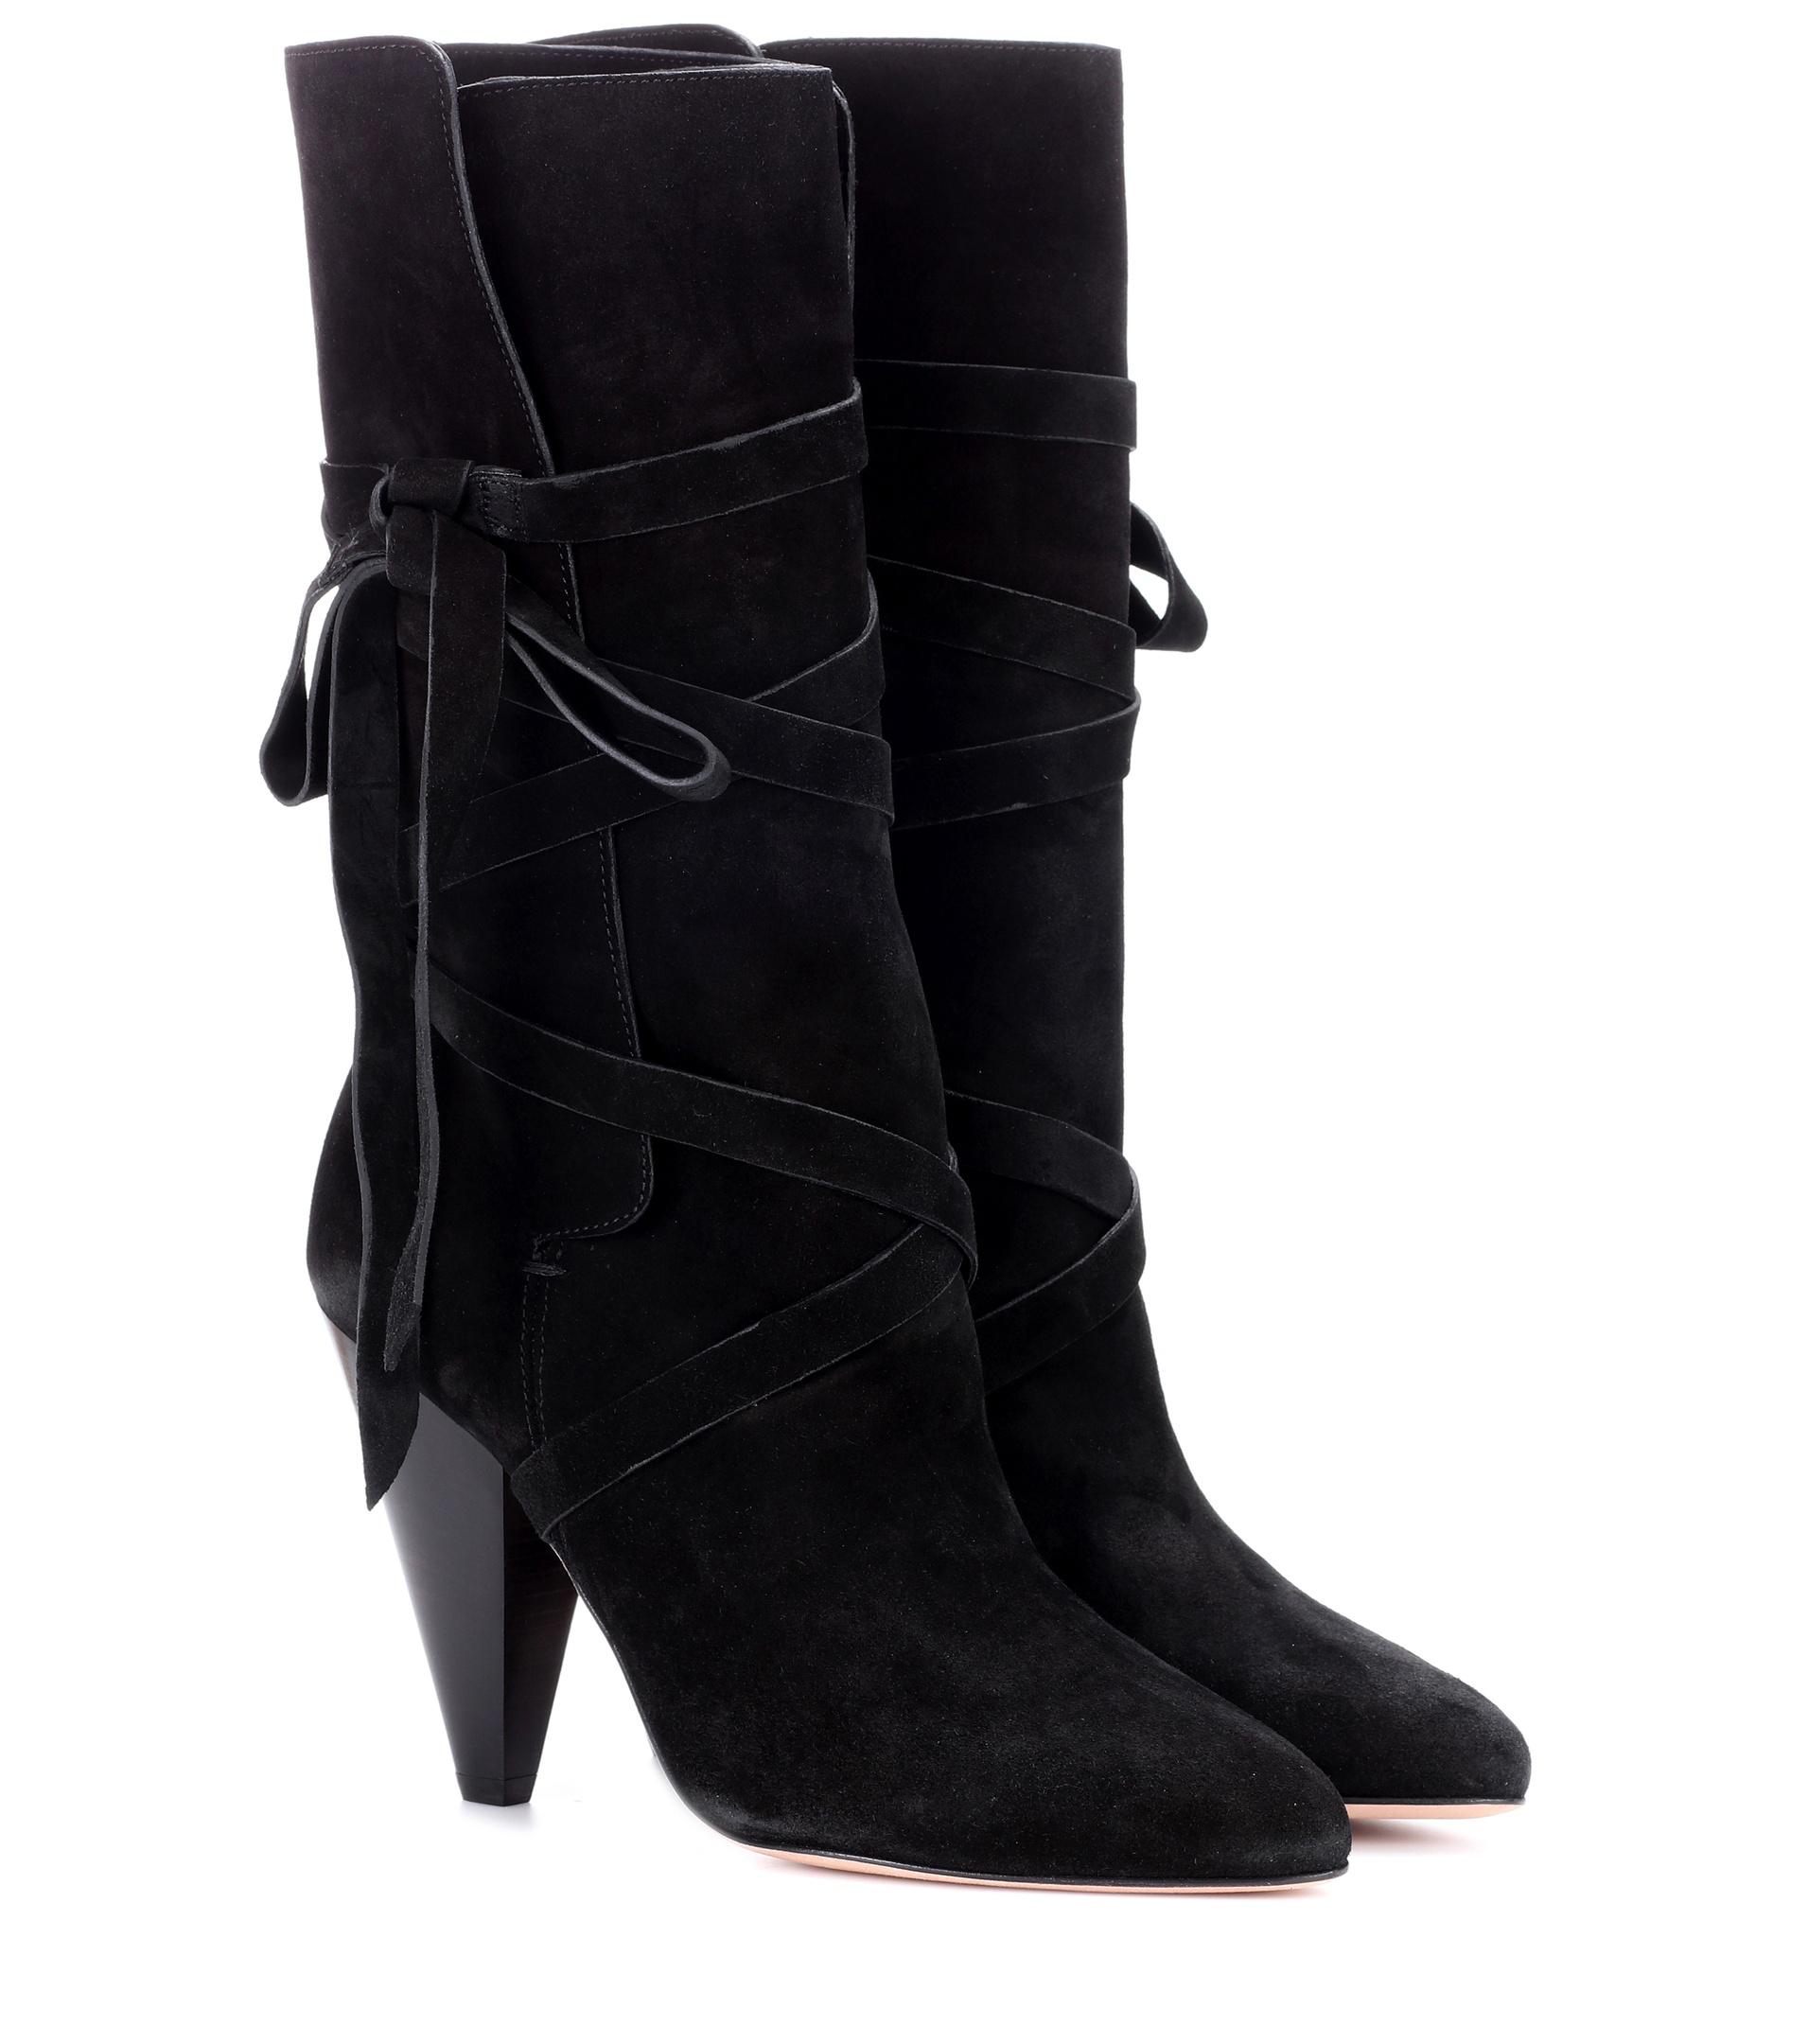 Veronica Beard Hall Suede Boots in Black - Lyst